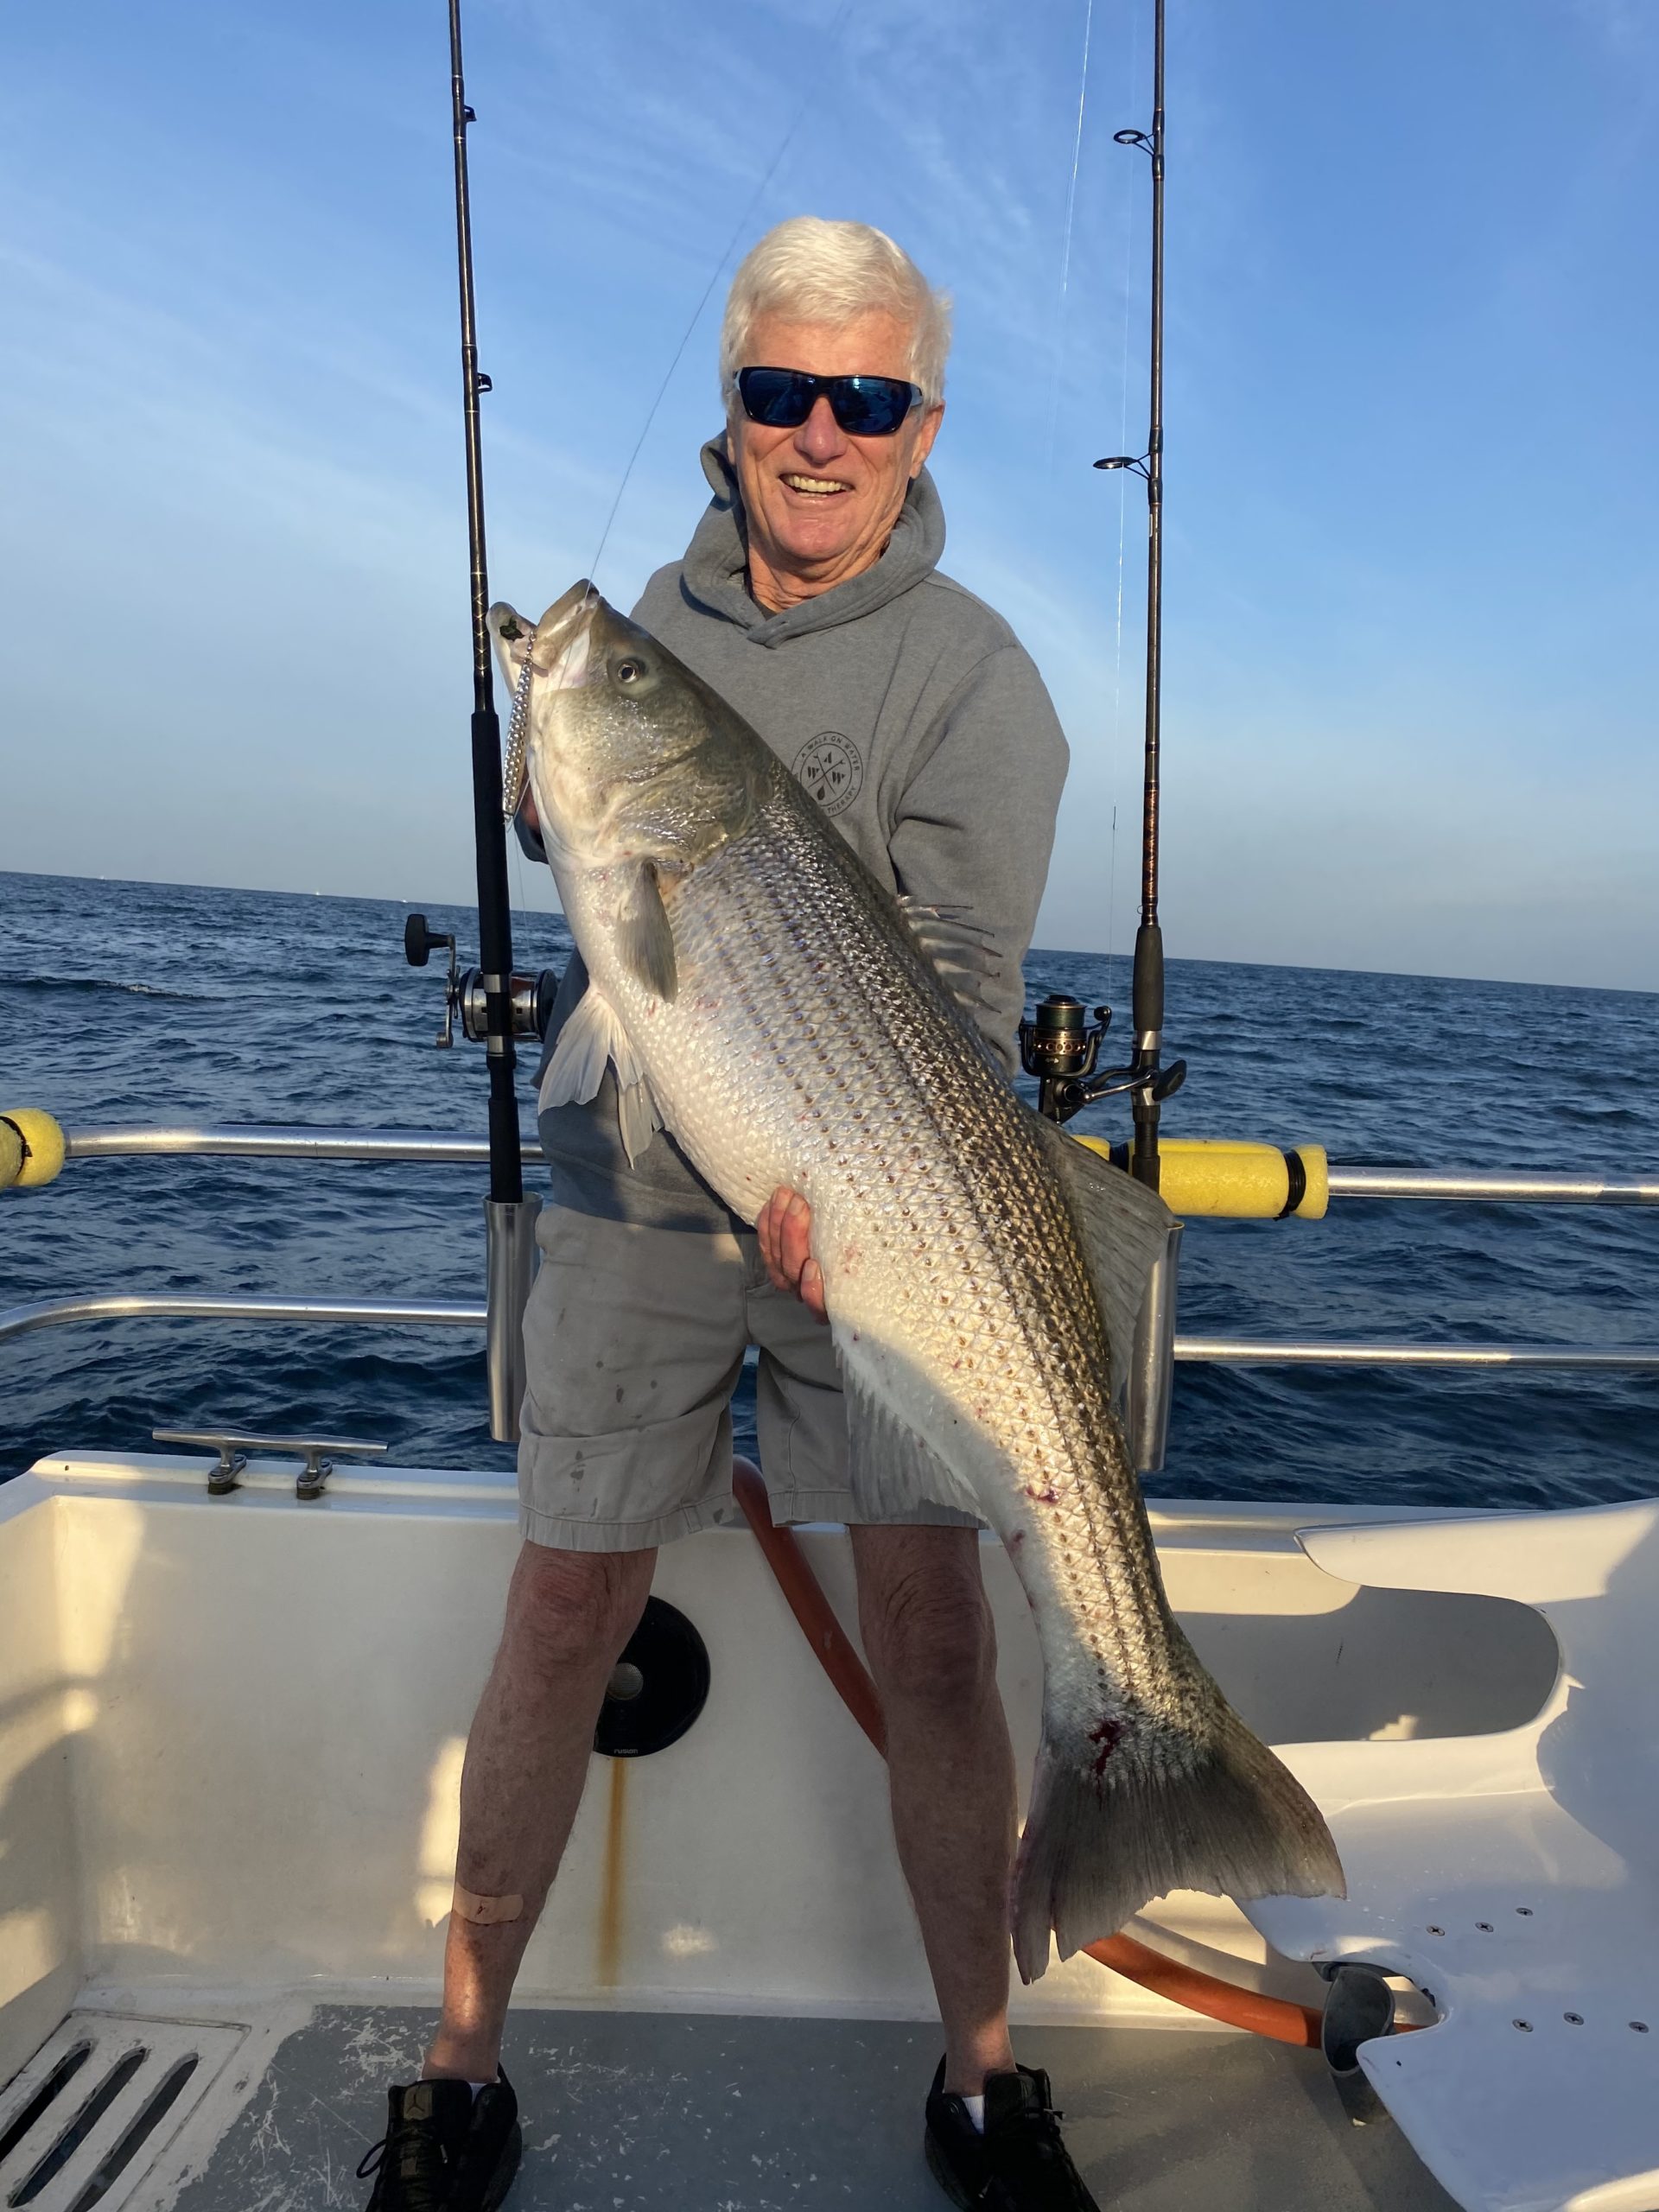 Big striped bass, like this one caught by Robert Becker aboard the Double D charter boat out of Westlake Fishing Lodge, are being caught on diamond jigs and light tackle off Montauk Point.  